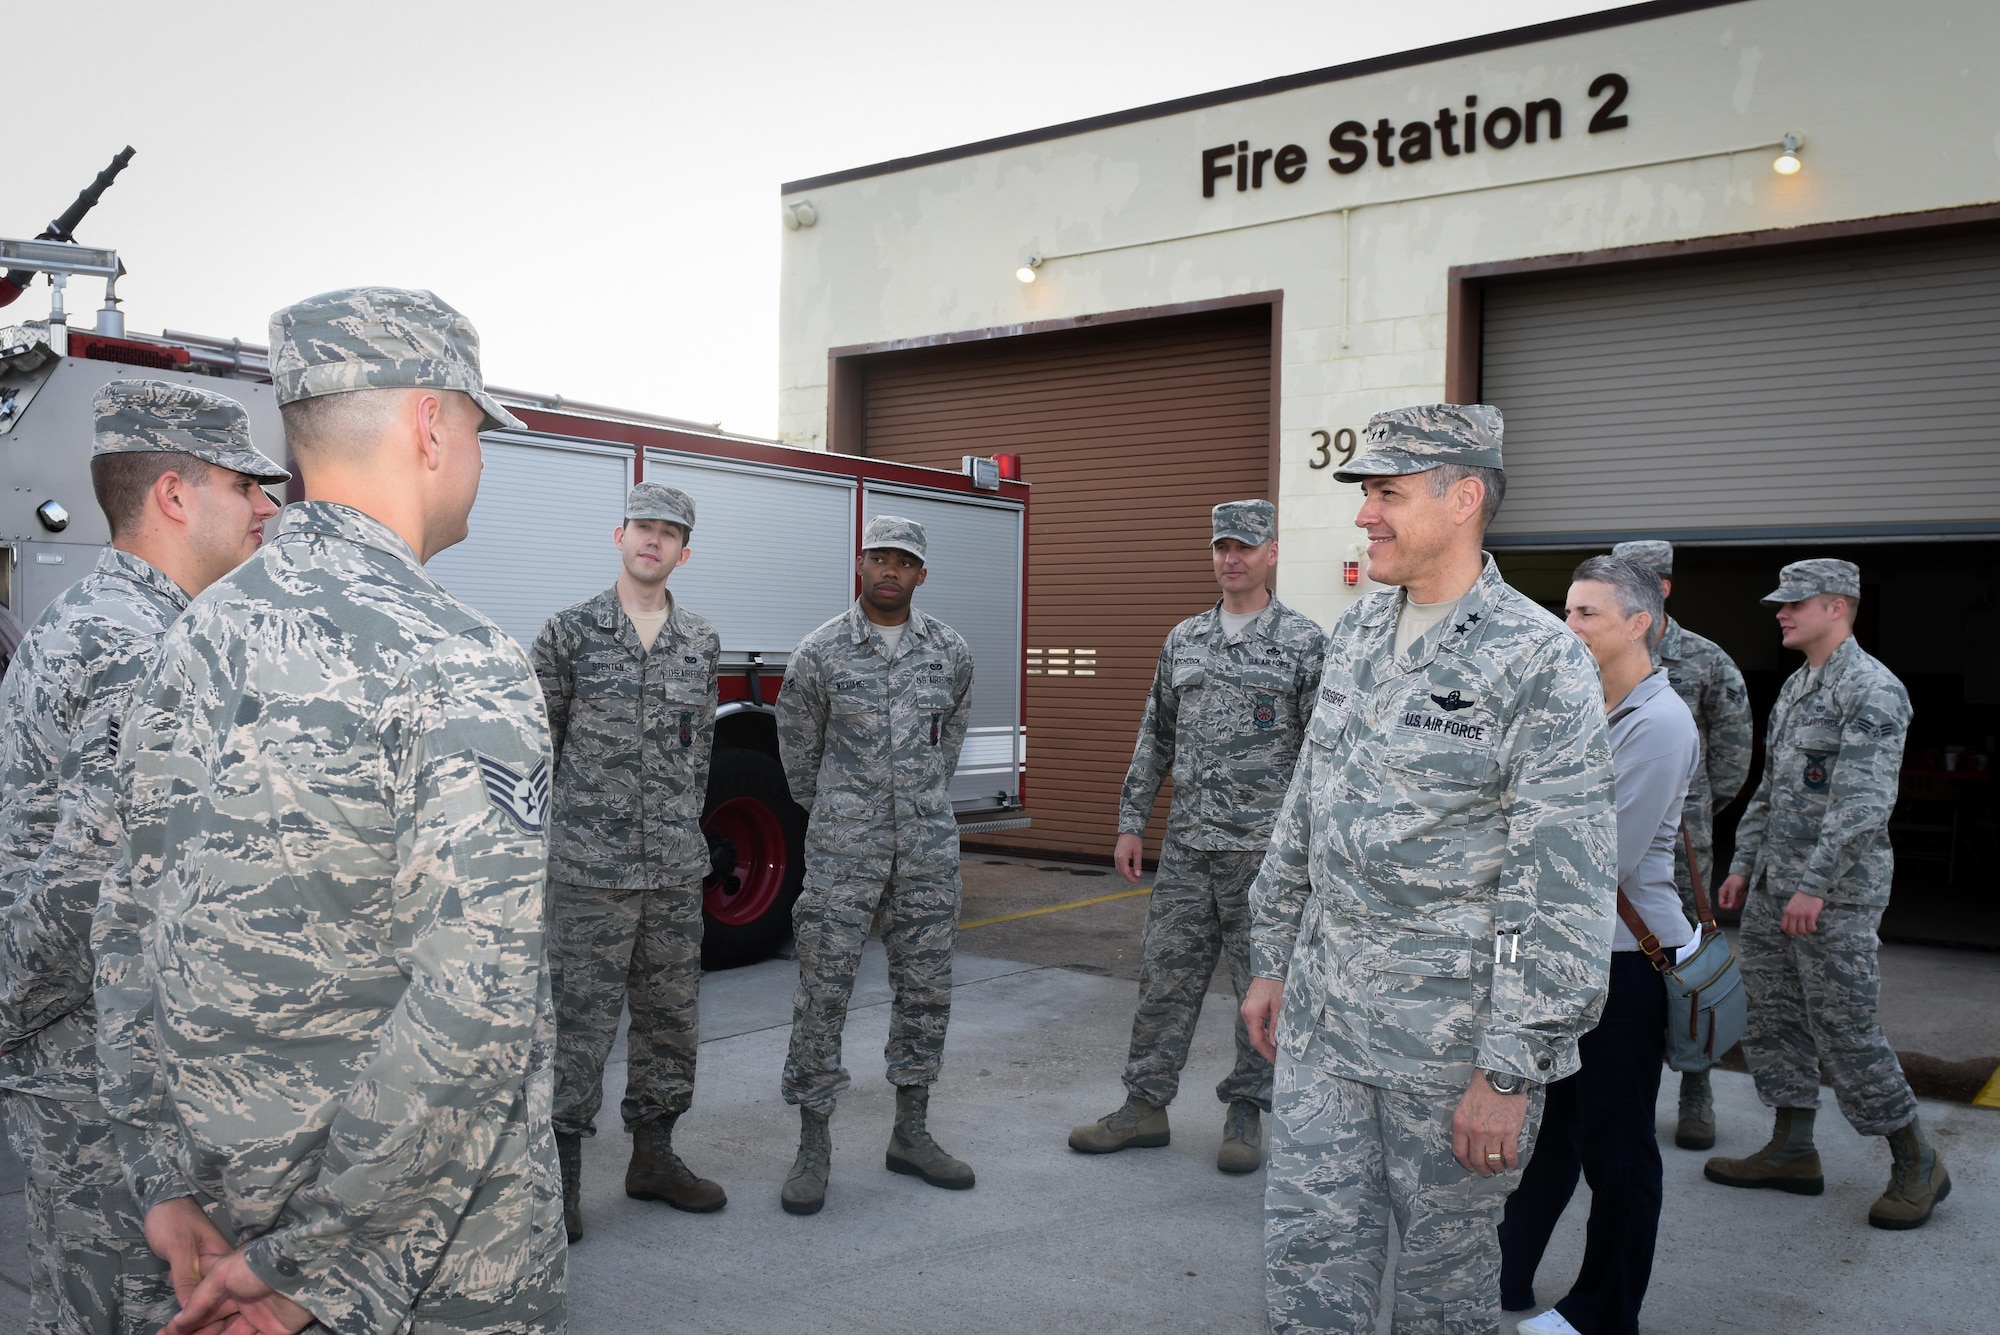 Maj. Gen. Thomas Bussiere, 8th Air Force commander, visits the fire station located on the East Reservation of Barksdale Air Force Base, La., April 21, 2017. There are three fire stations within the base that protect 22,000 acres of land. (U.S. Air Force photo/Airman 1st Class Sydney Bennett)